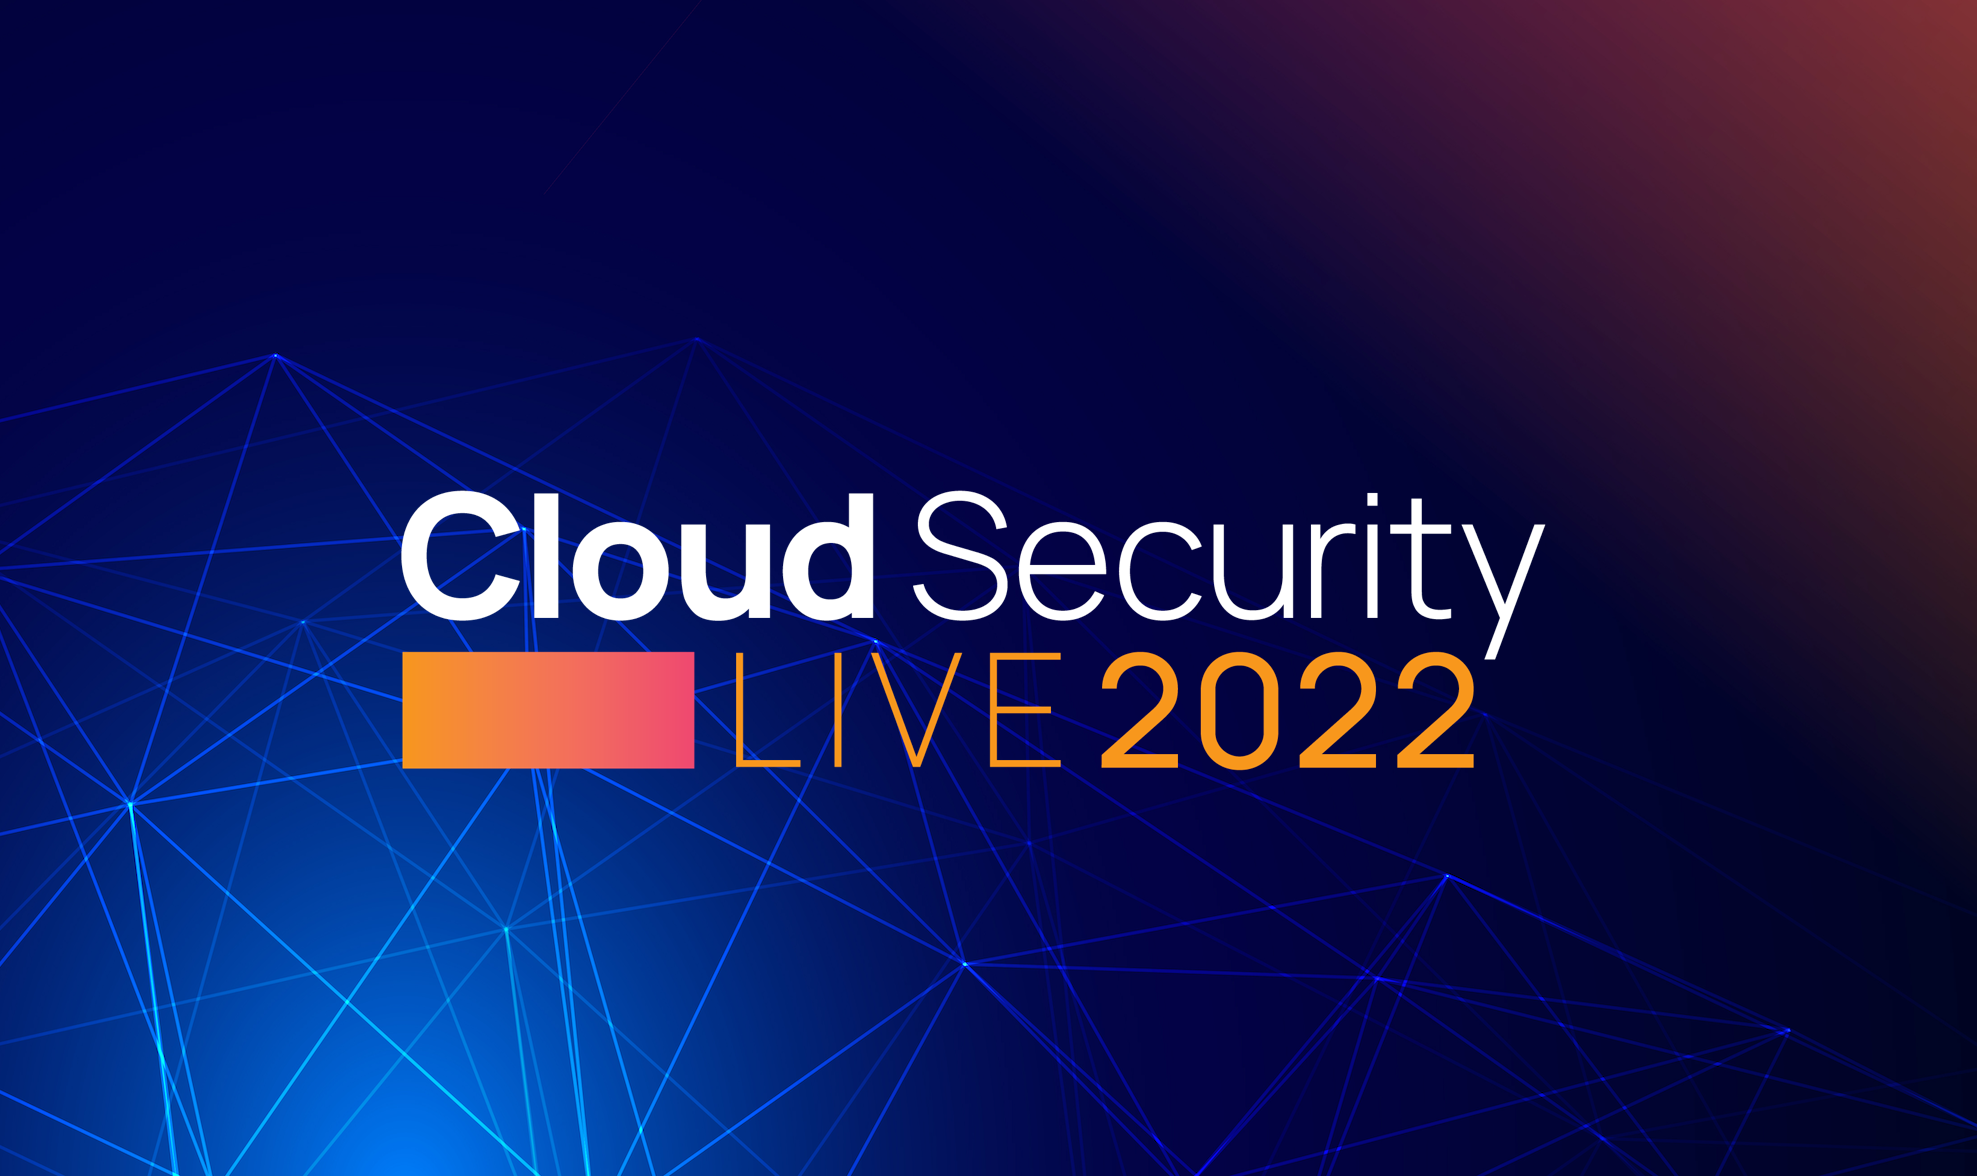 6 Takeaways from Cloud Security LIVE 2022